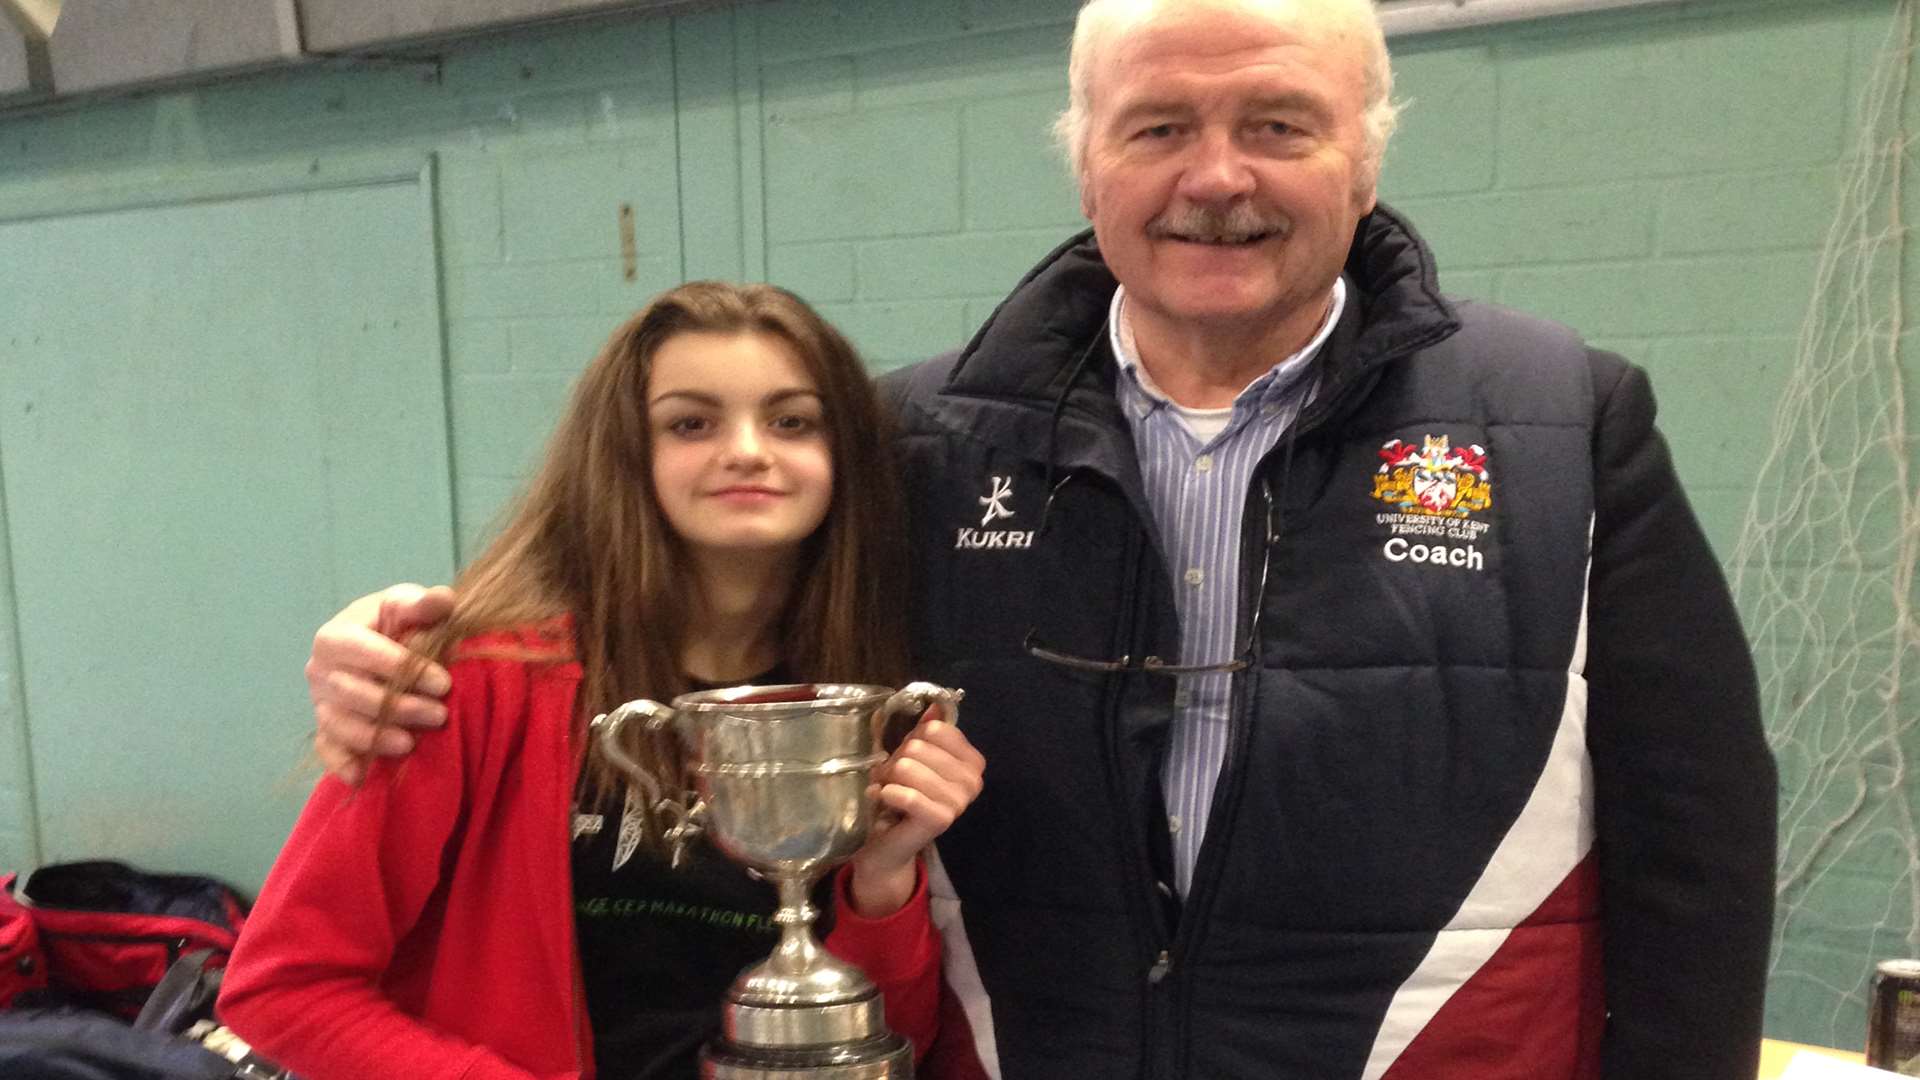 Georgia was presented with the Kent championship trophy with coach Peter Huggins